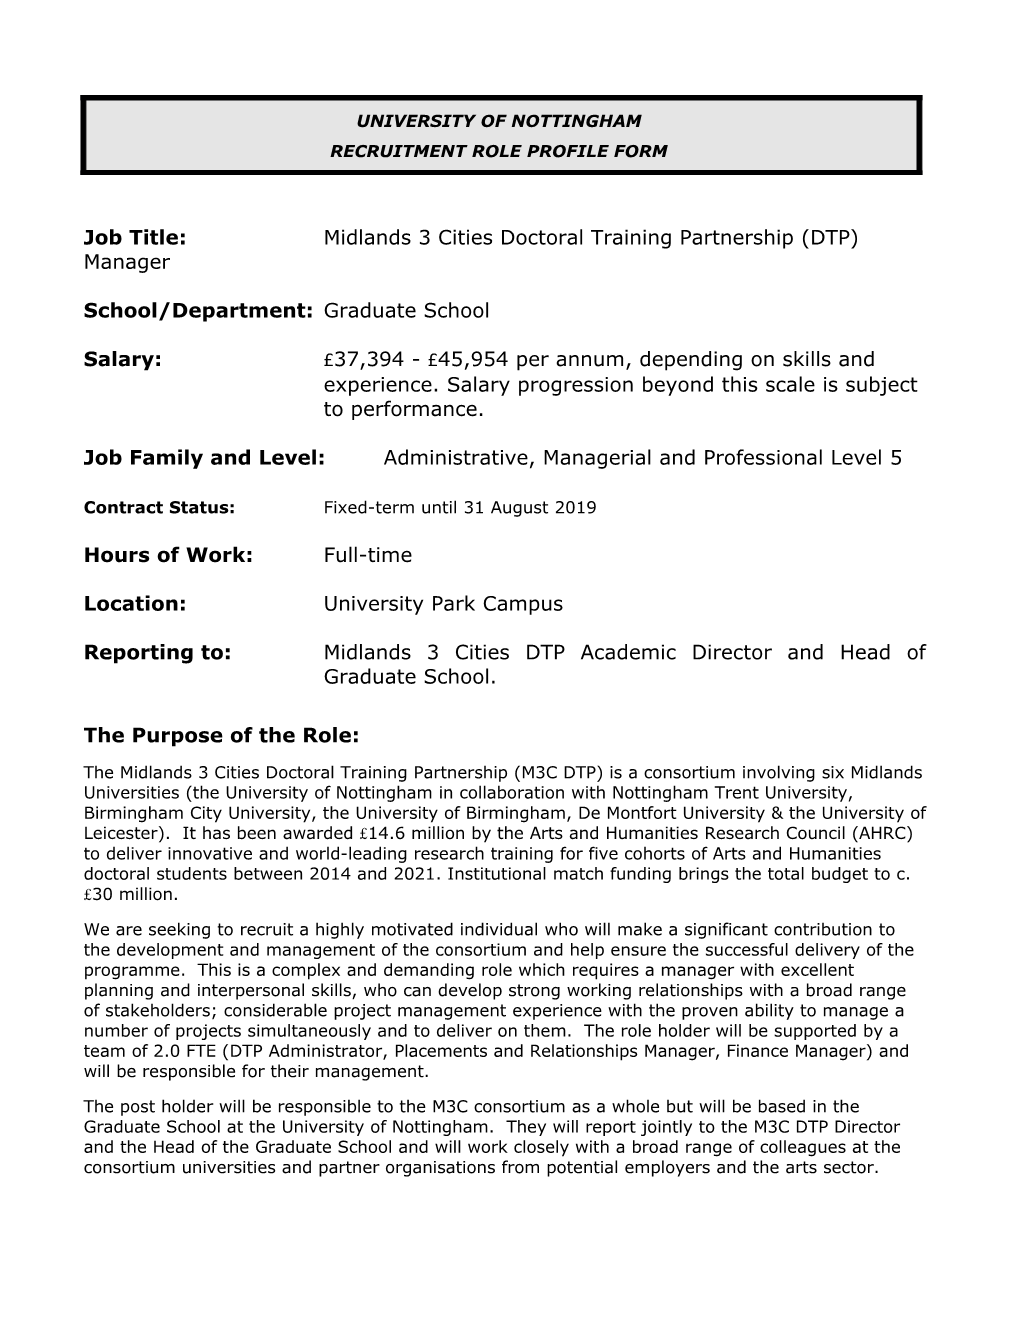 Job Title:Midlands 3 Cities Doctoral Training Partnership (DTP) Manager